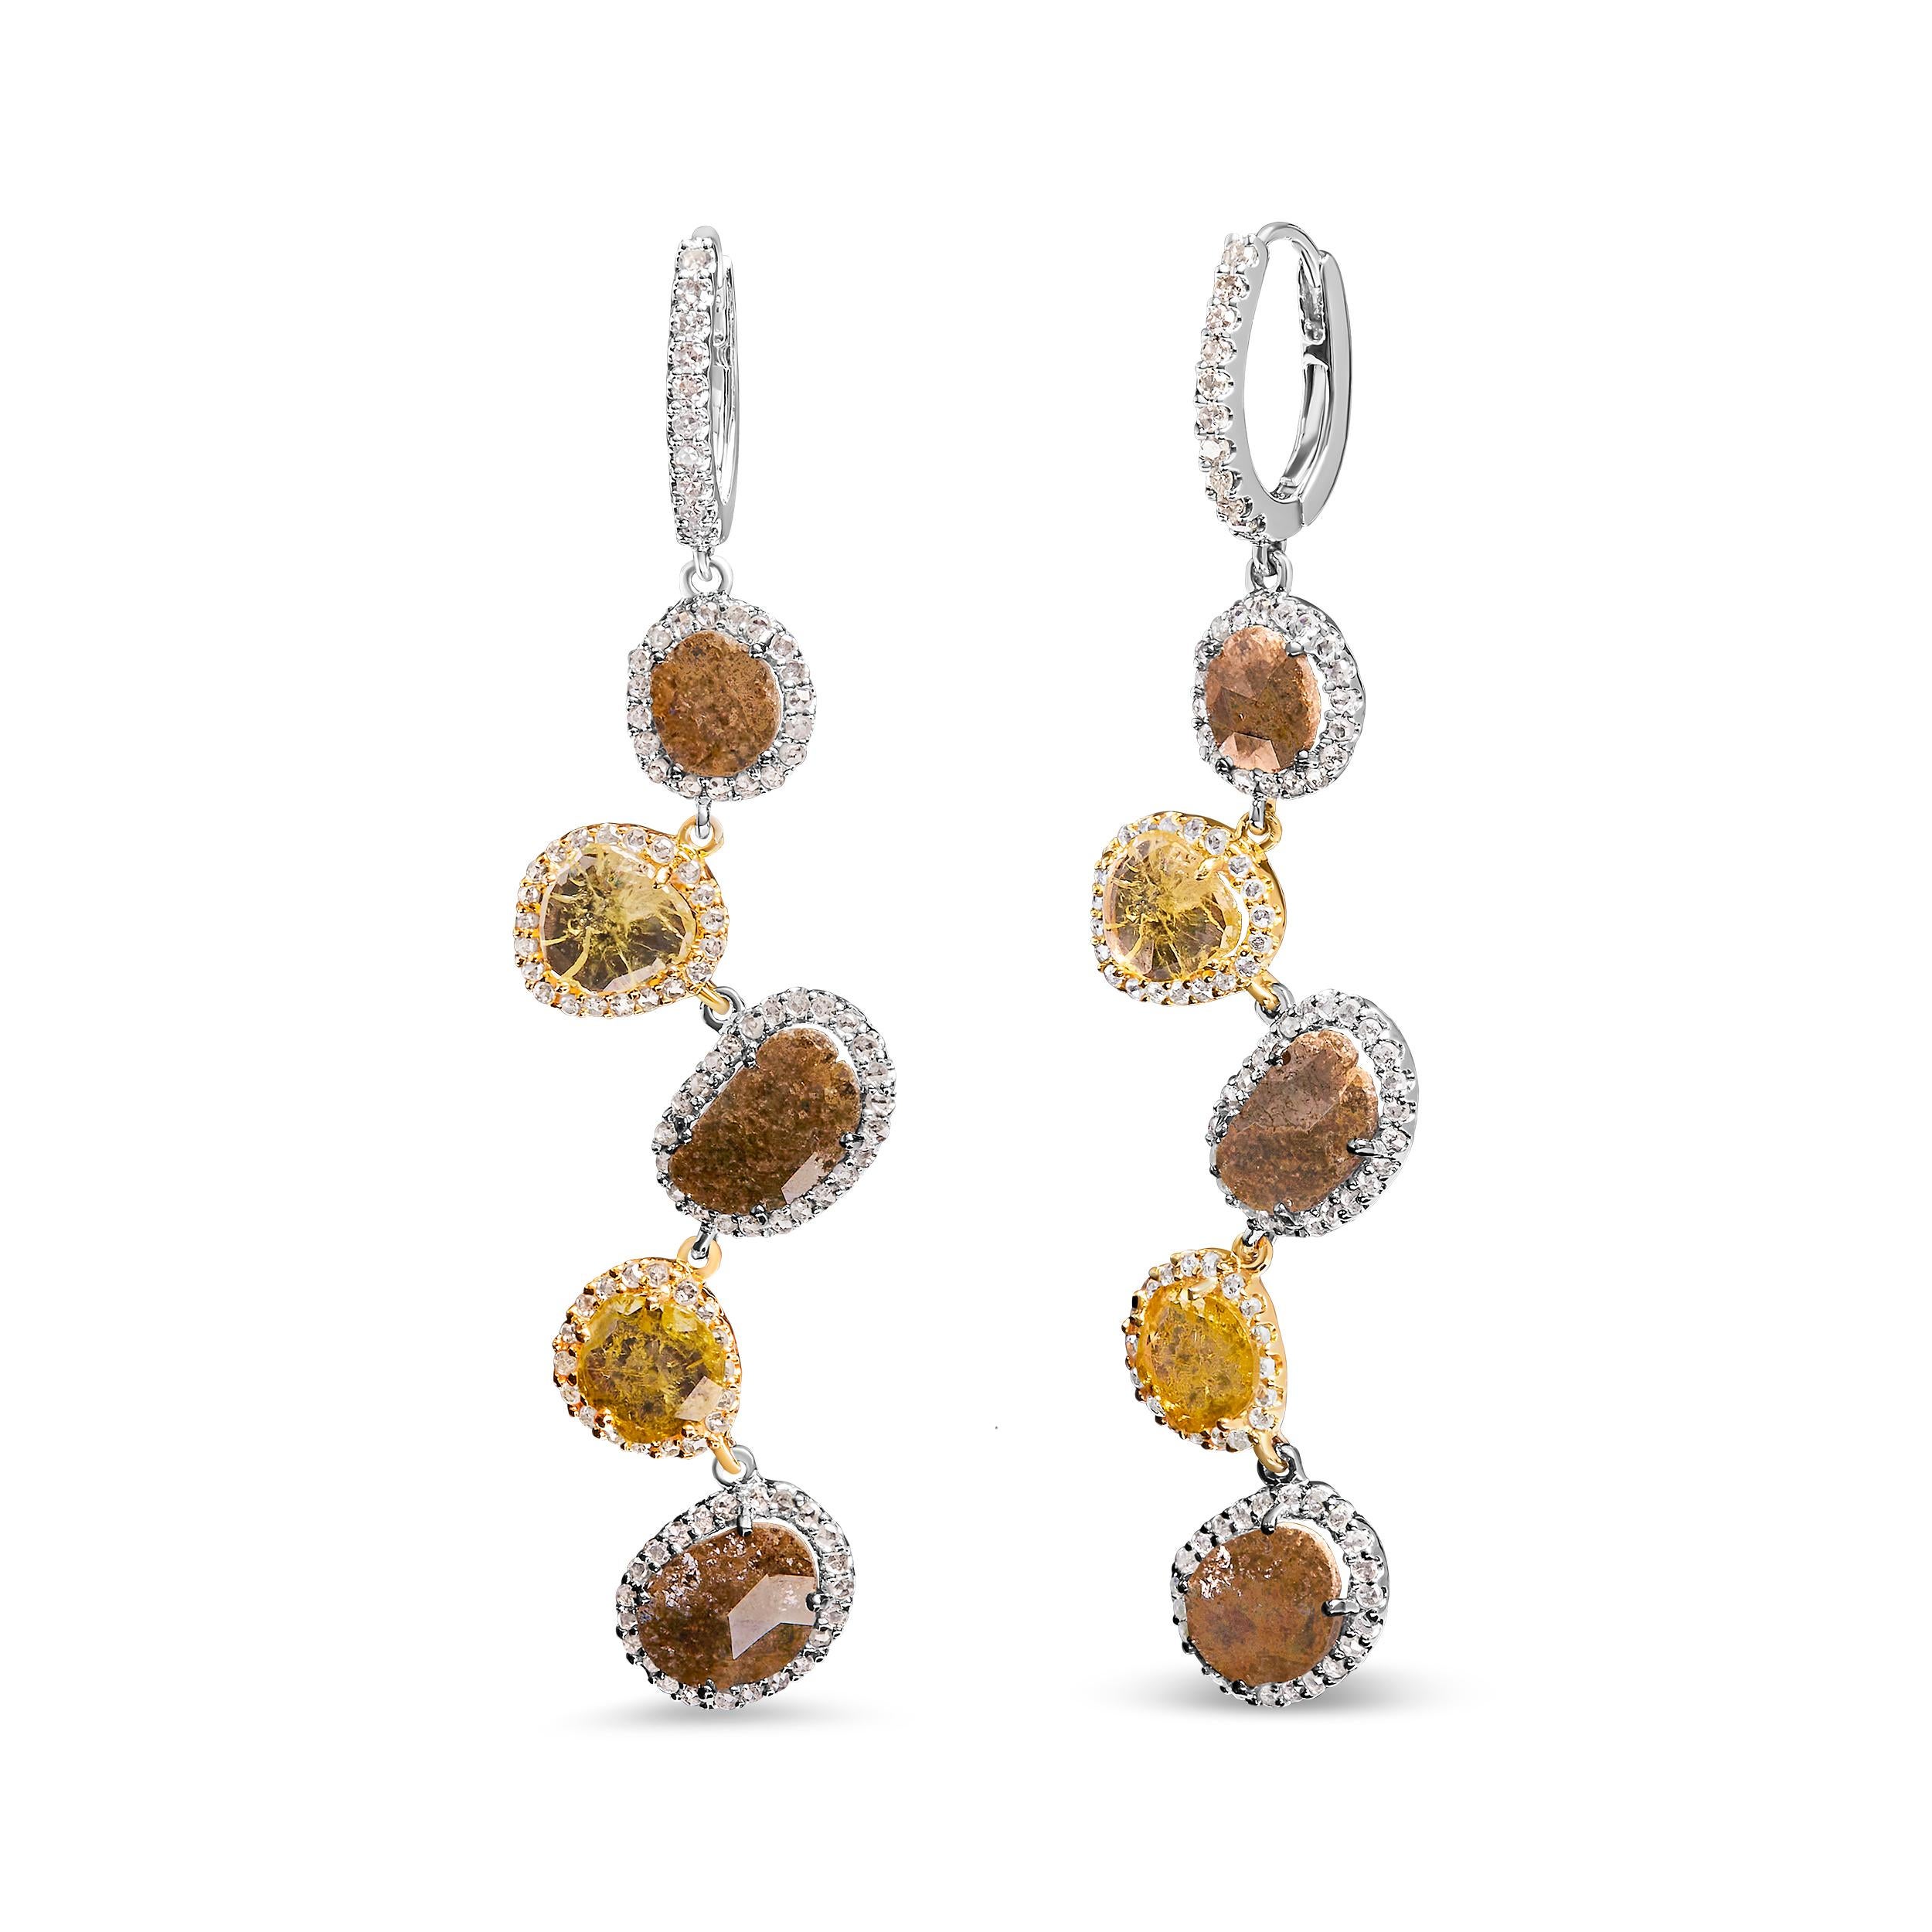 Introducing our captivating drop and dangle earrings, expertly crafted from 14K white gold and adorned with an exquisite combination of fancy brown and yellow diamonds. With a total weight of 8 5/8 carats, these earrings are an impressive statement